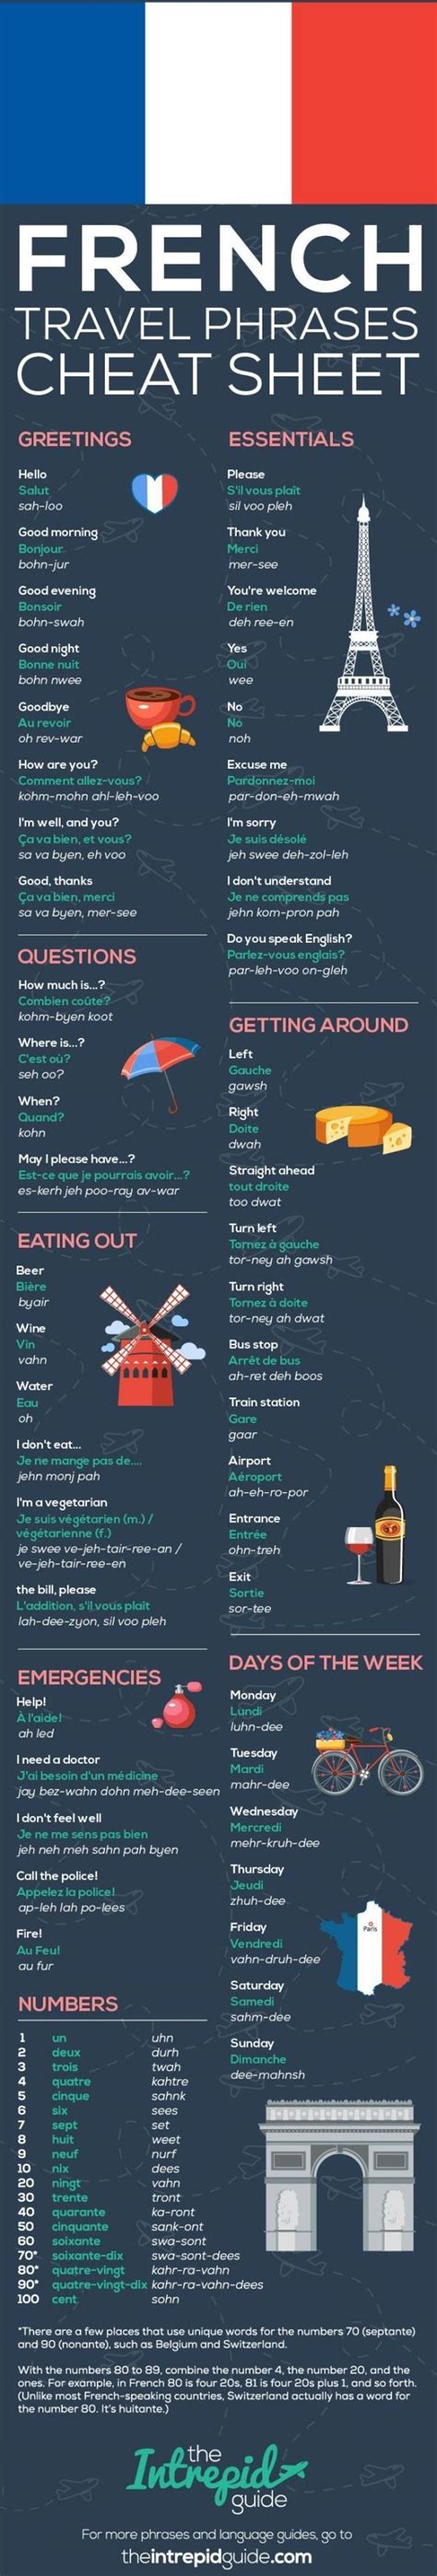 French Phrases French travel phrase guide with pronunication by echkbet ...